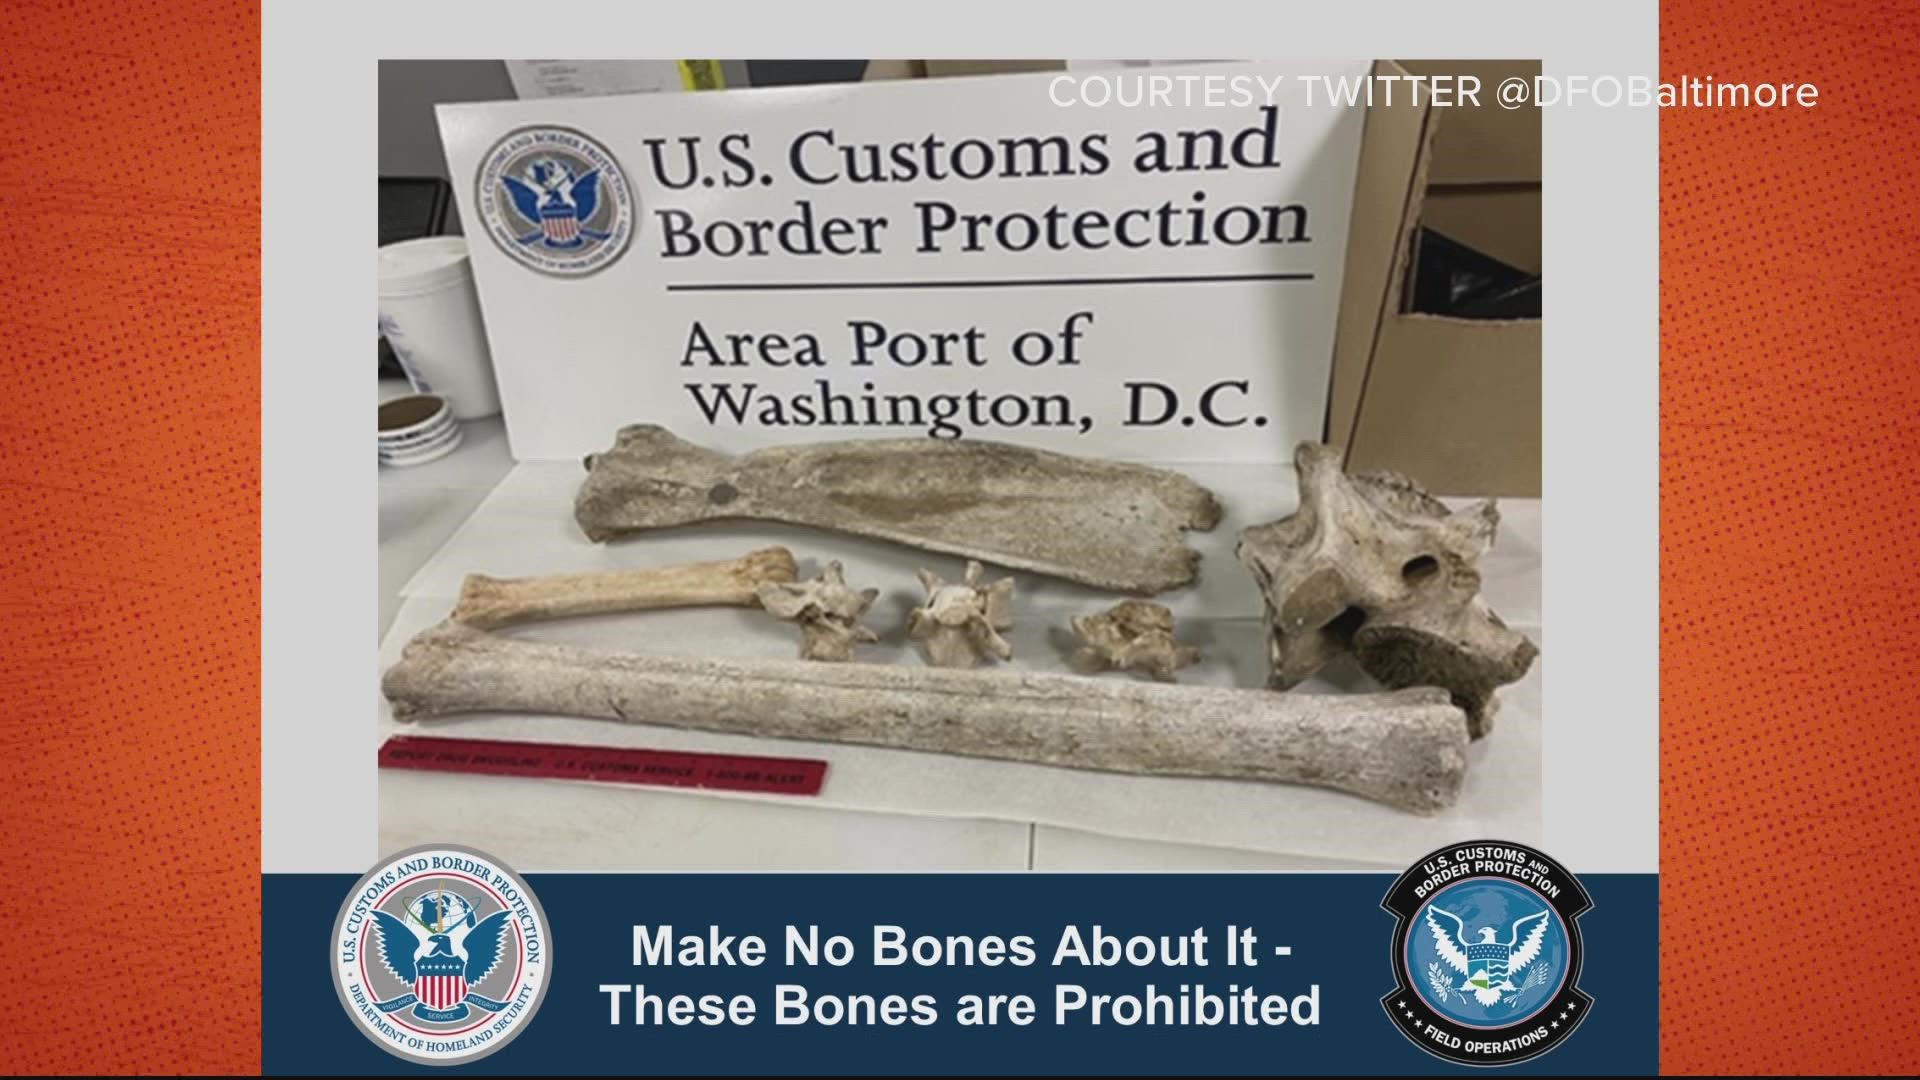 The bones were seized at the request of the U.S. Fish and Wildlife Service.